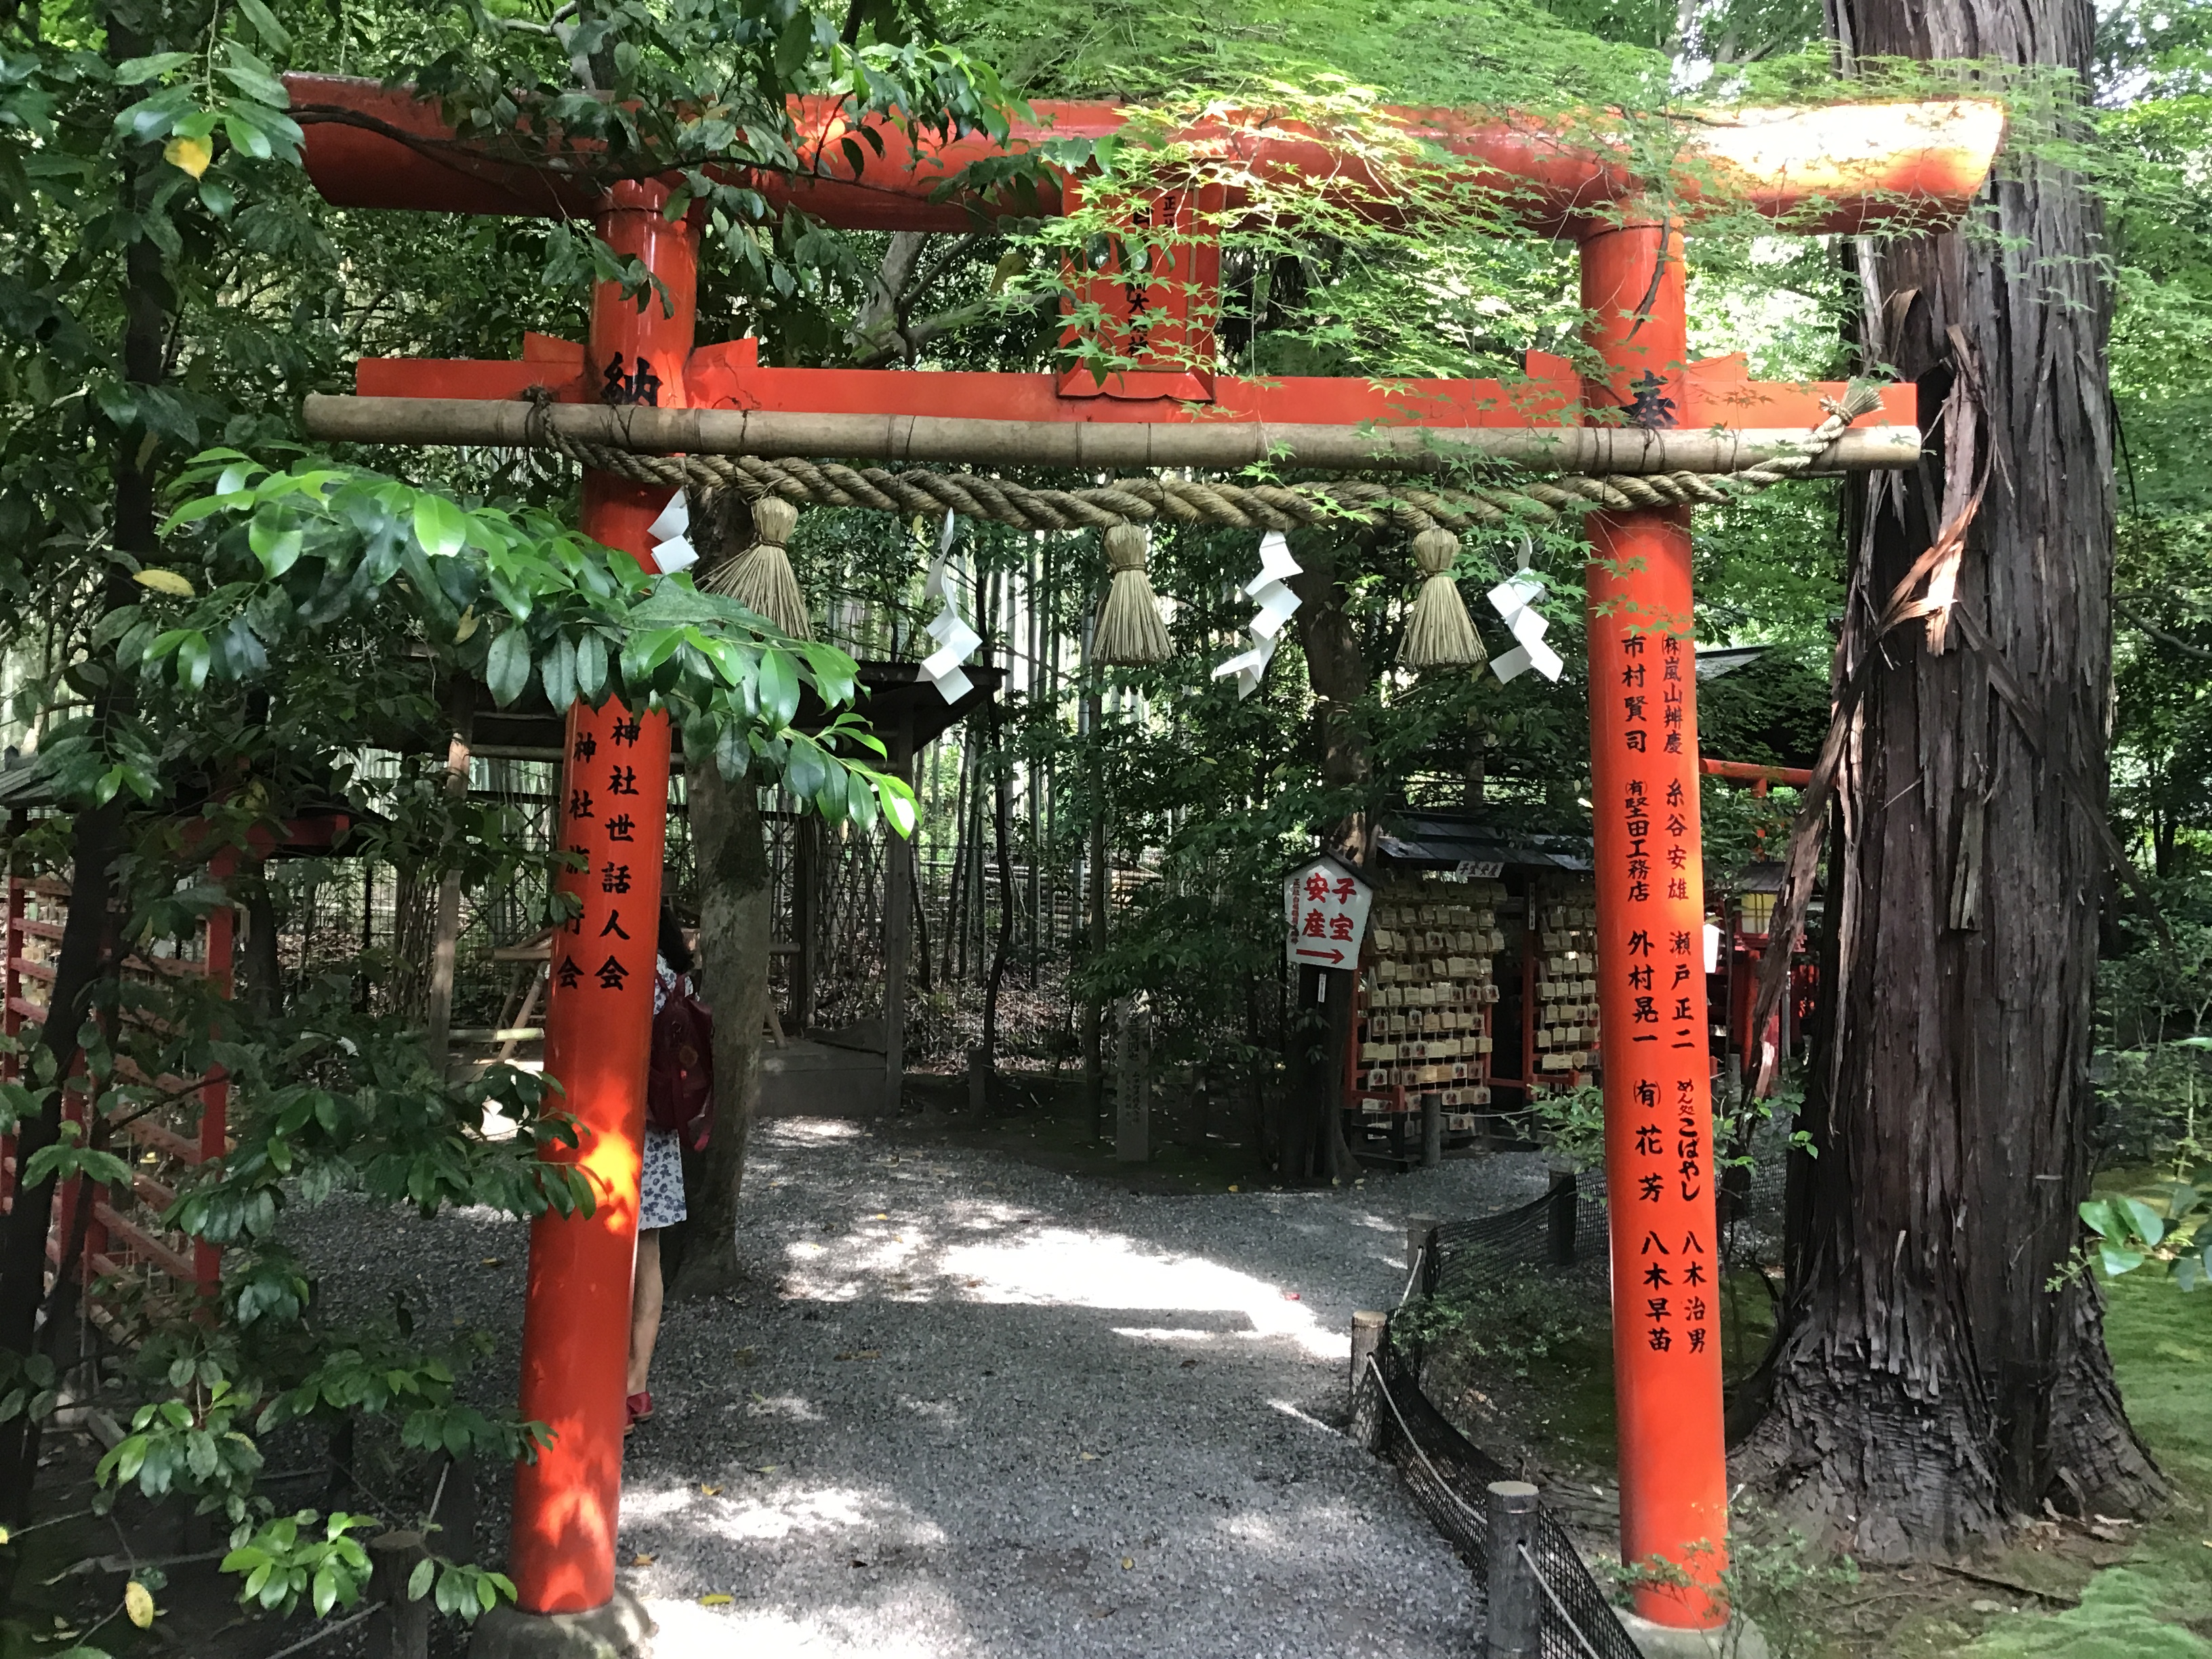 A torii gate in the bamboo forest.